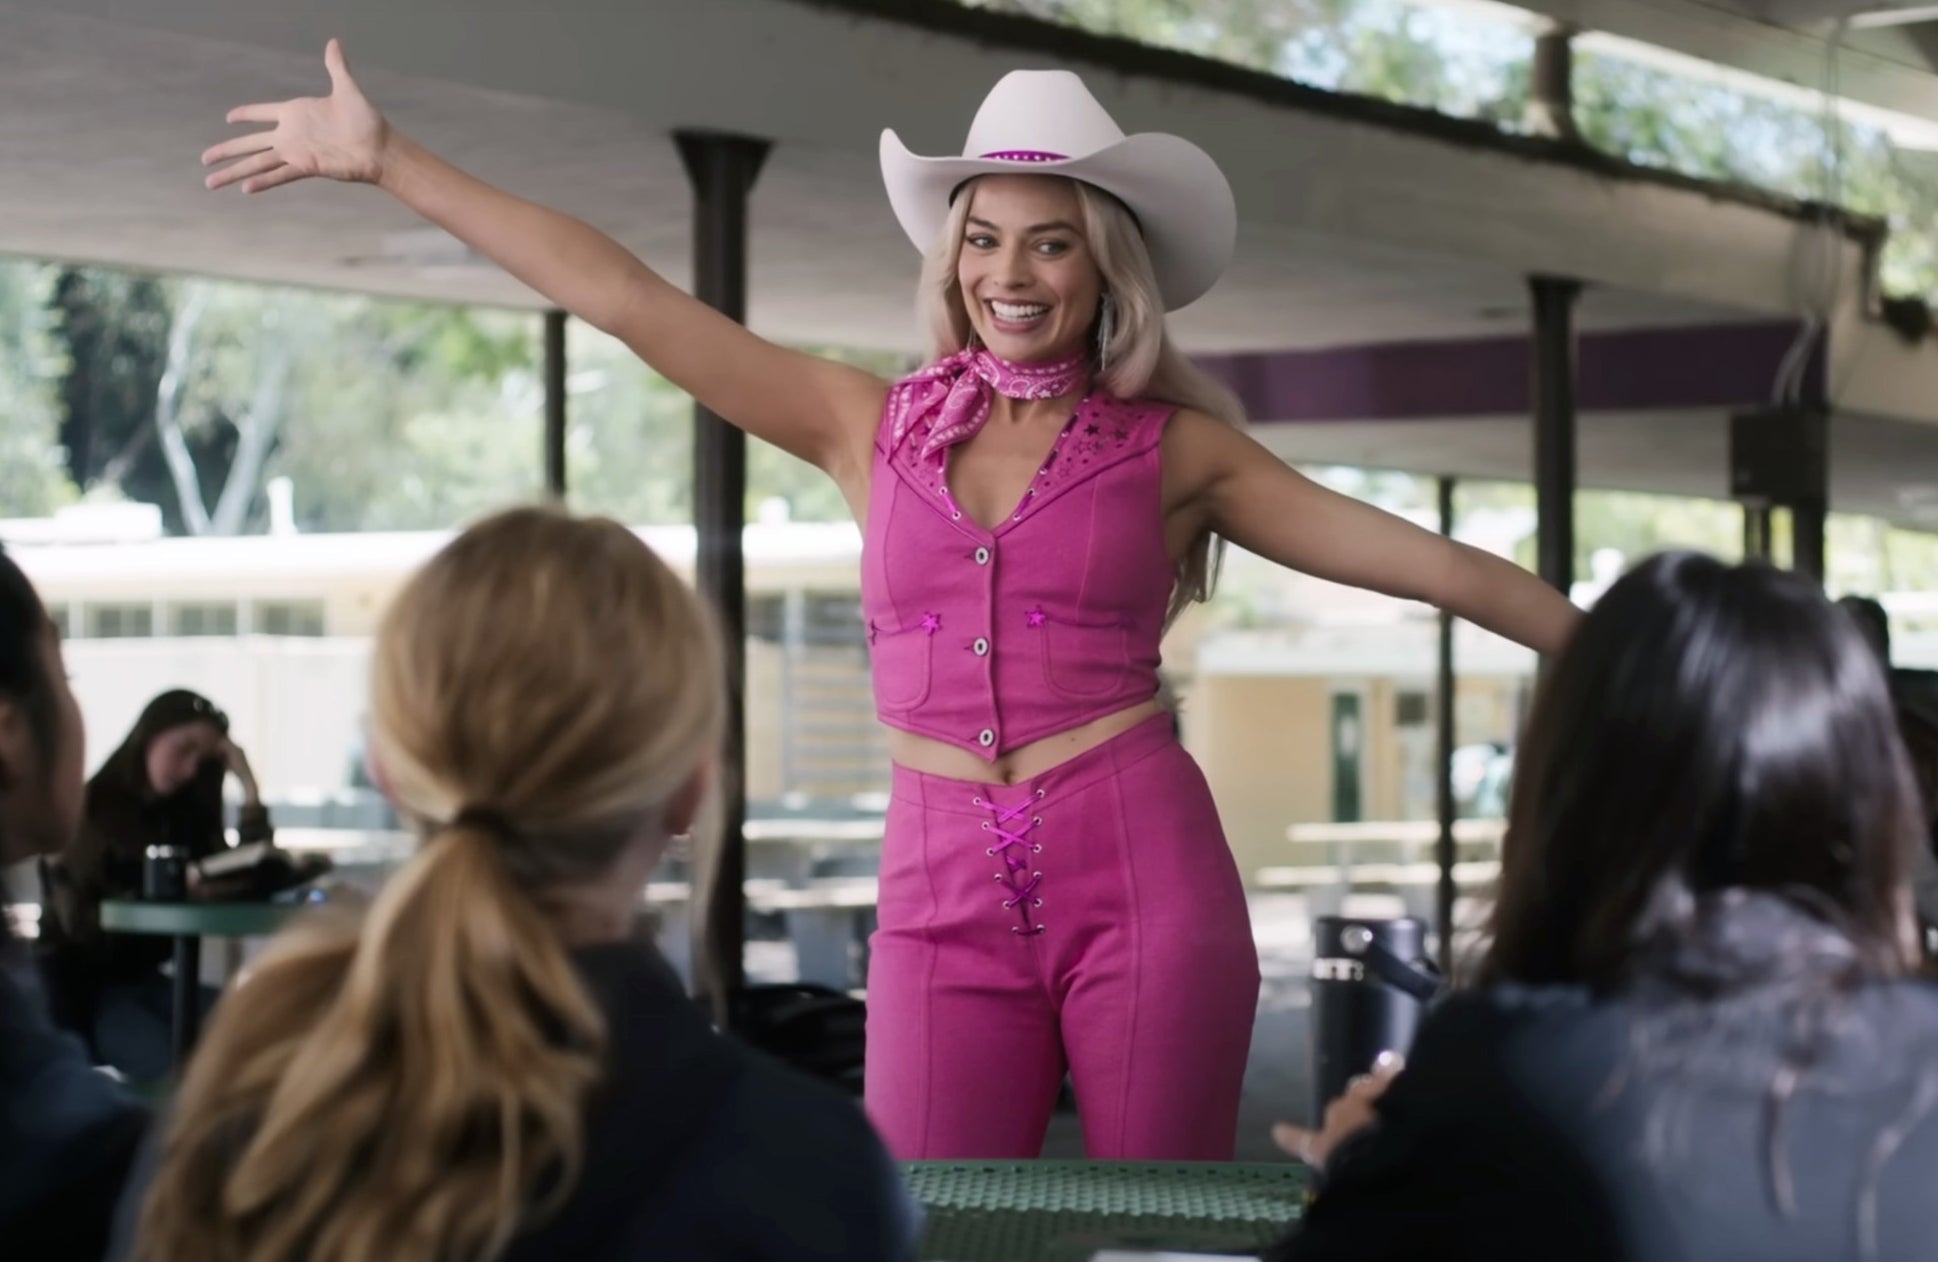 Margot Robbie in a cowboy hat and pink ruffled outfit gesturing with arms wide, standing indoors with others around